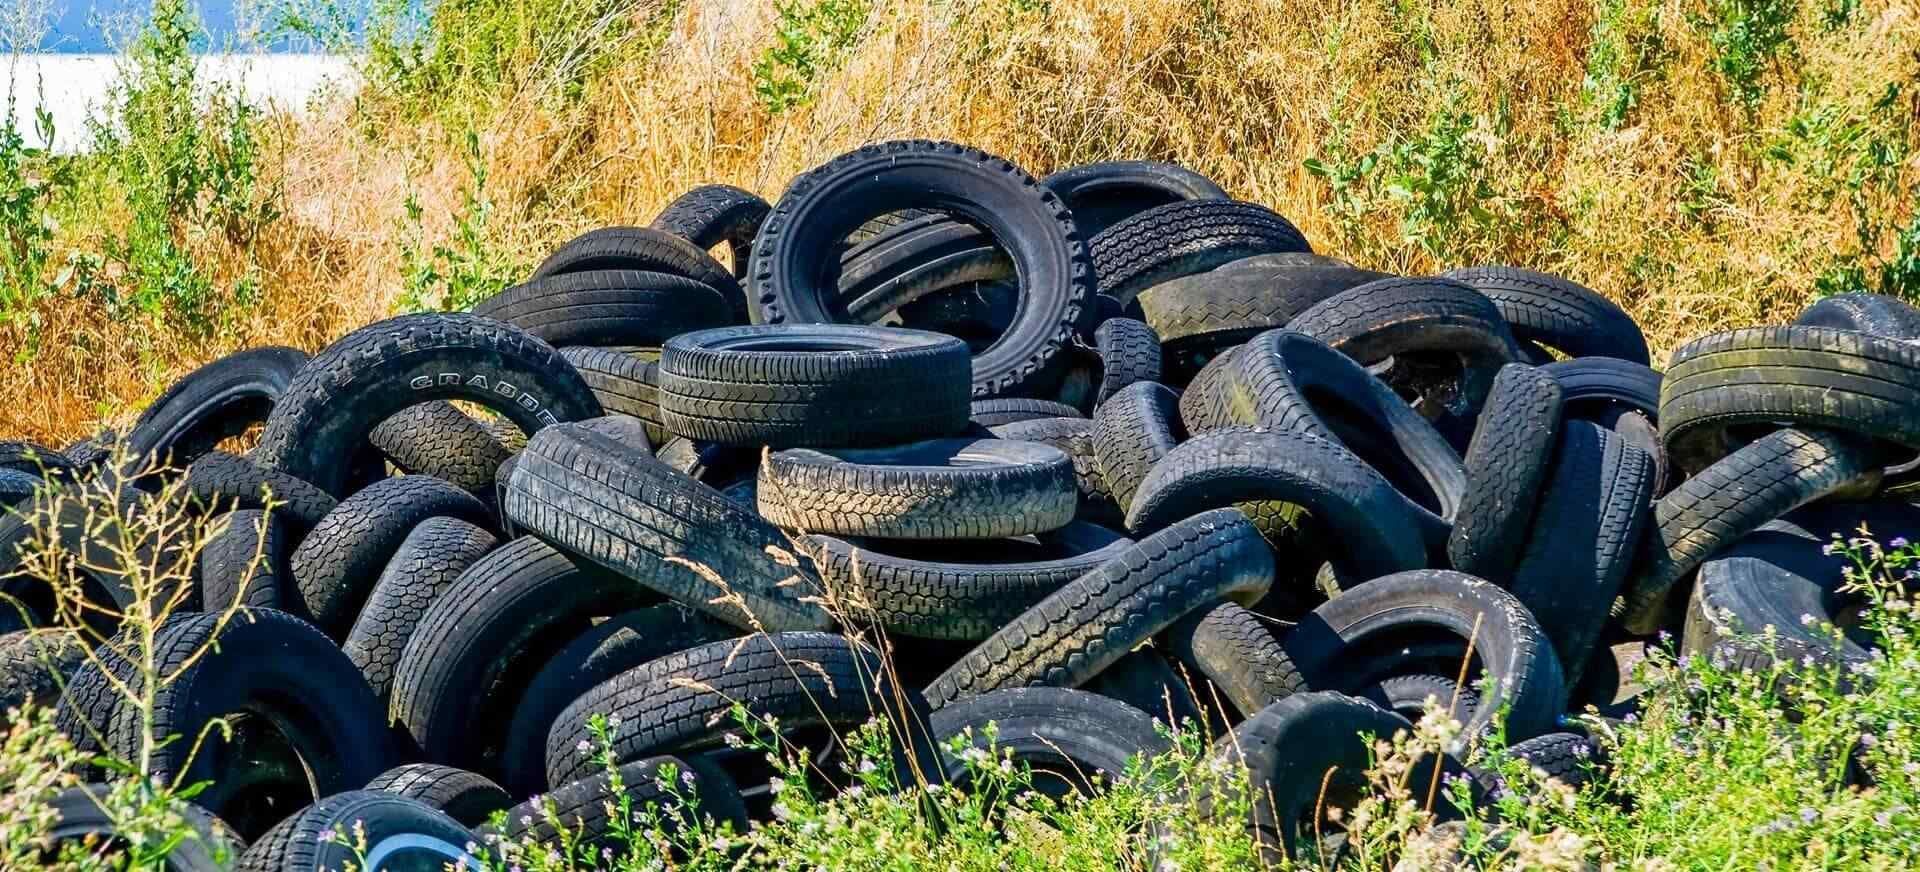 tire and rubber removal services